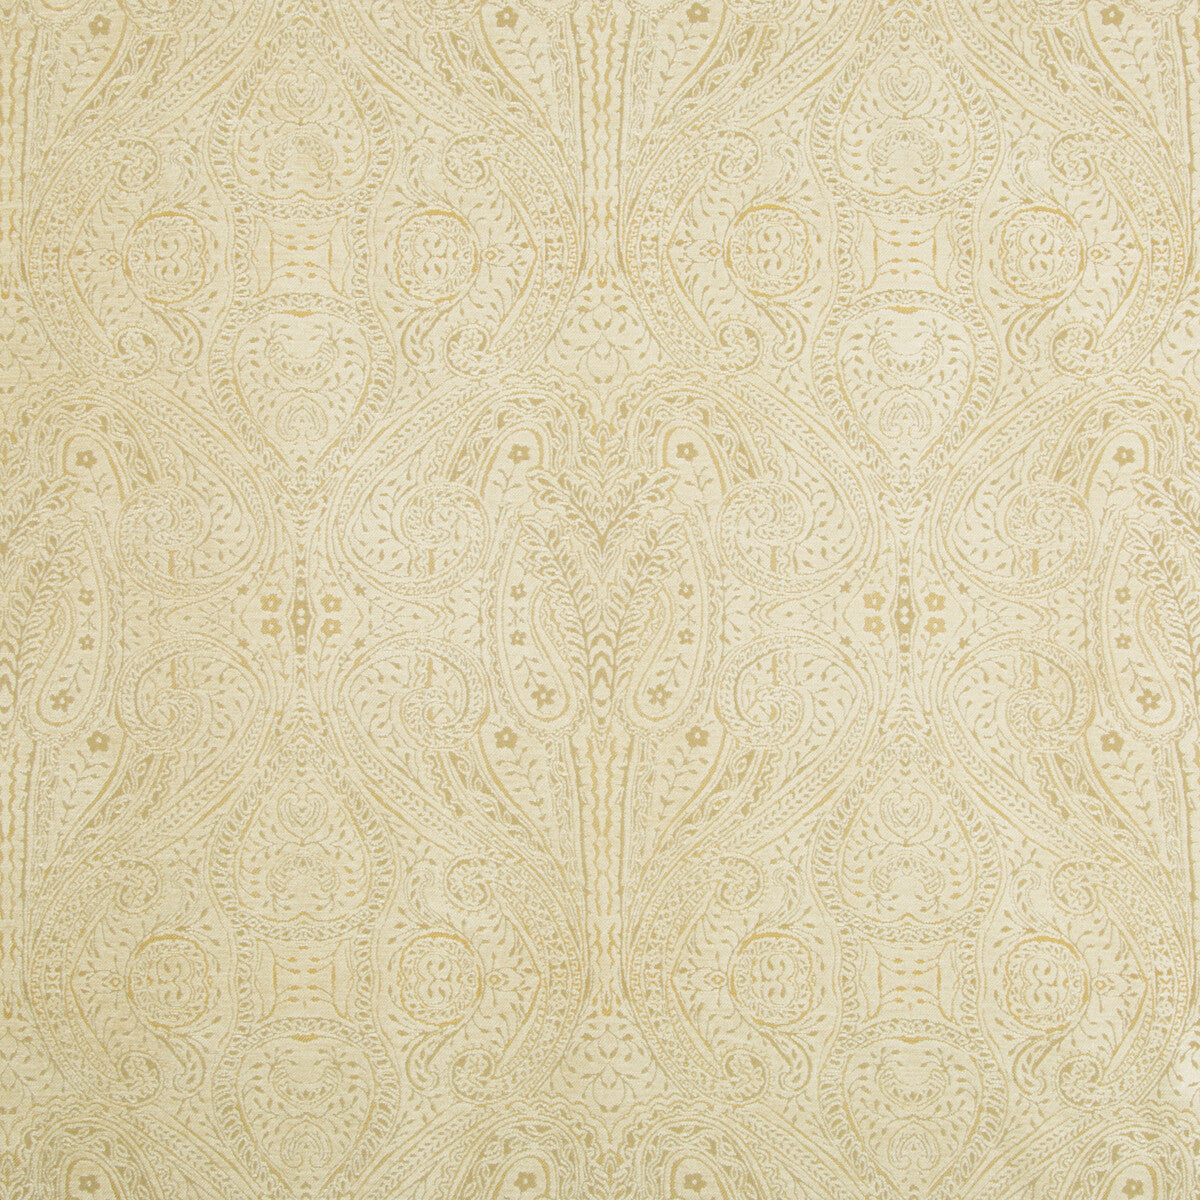 Kravet Contract fabric in 34767-16 color - pattern 34767.16.0 - by Kravet Contract in the Gis collection